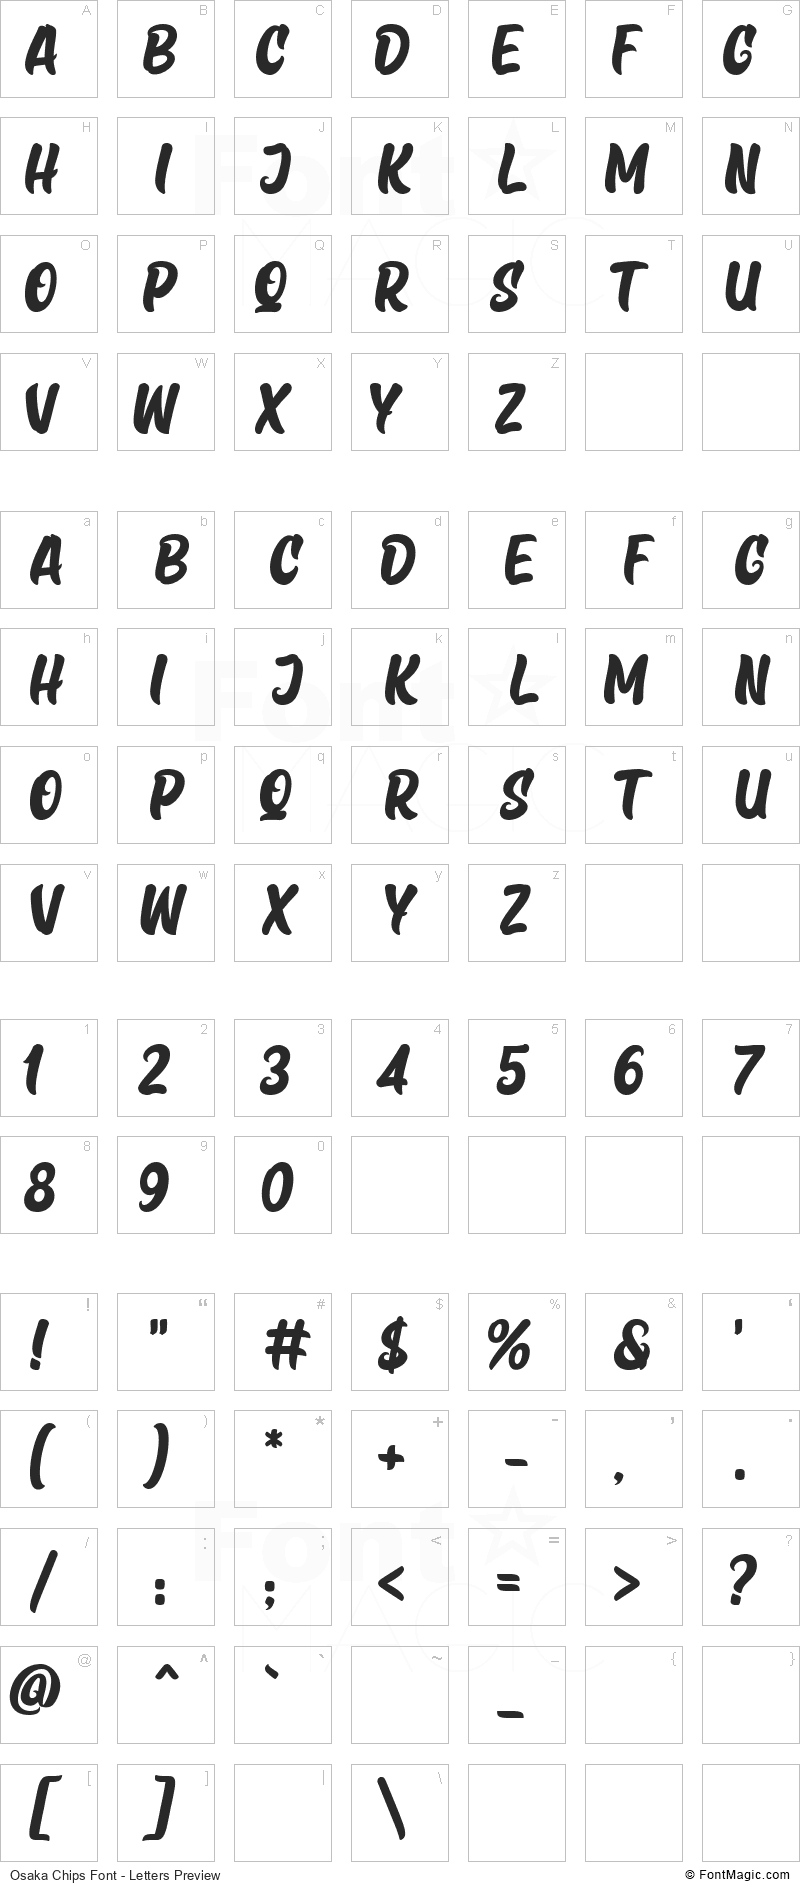 Osaka Chips Font - All Latters Preview Chart